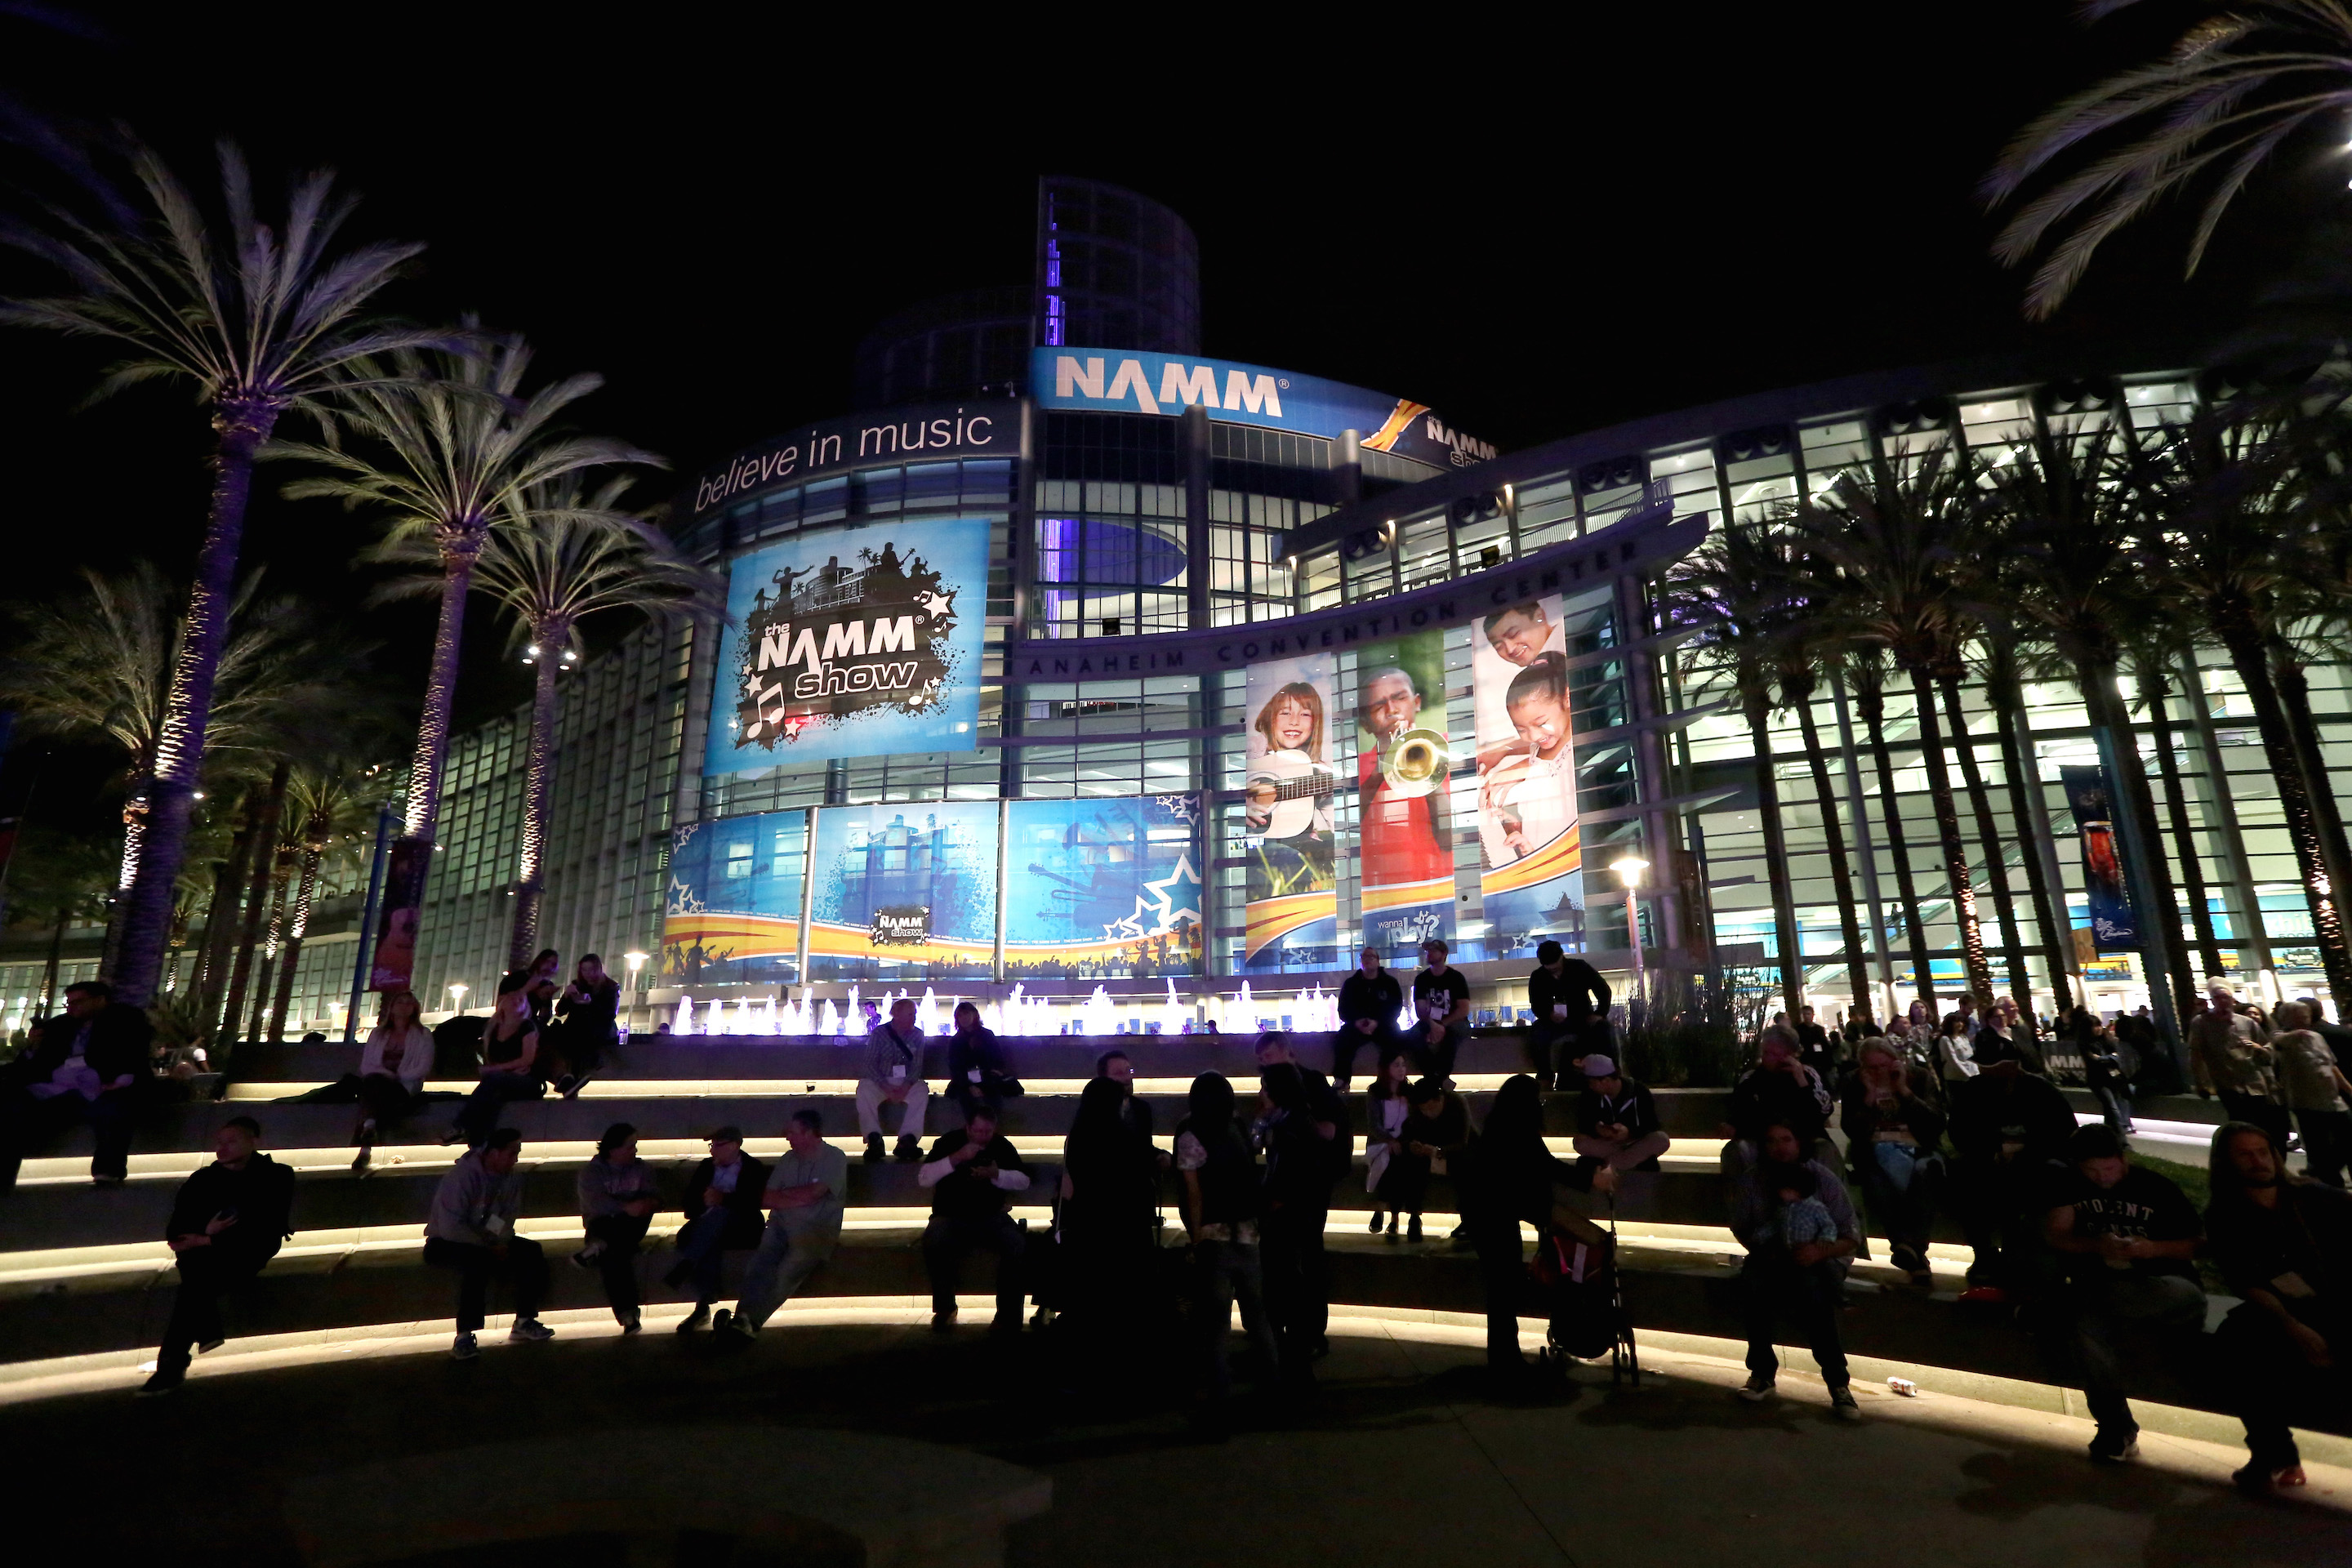 ANAHEIM, CA - JANUARY 22: A general view of atmosphere at the 2015 National Association of Music Merchants show at the Anaheim Convention Center on January 22, 2015 in Anaheim, California. (Photo by Jesse Grant/Getty Images for NAMM)